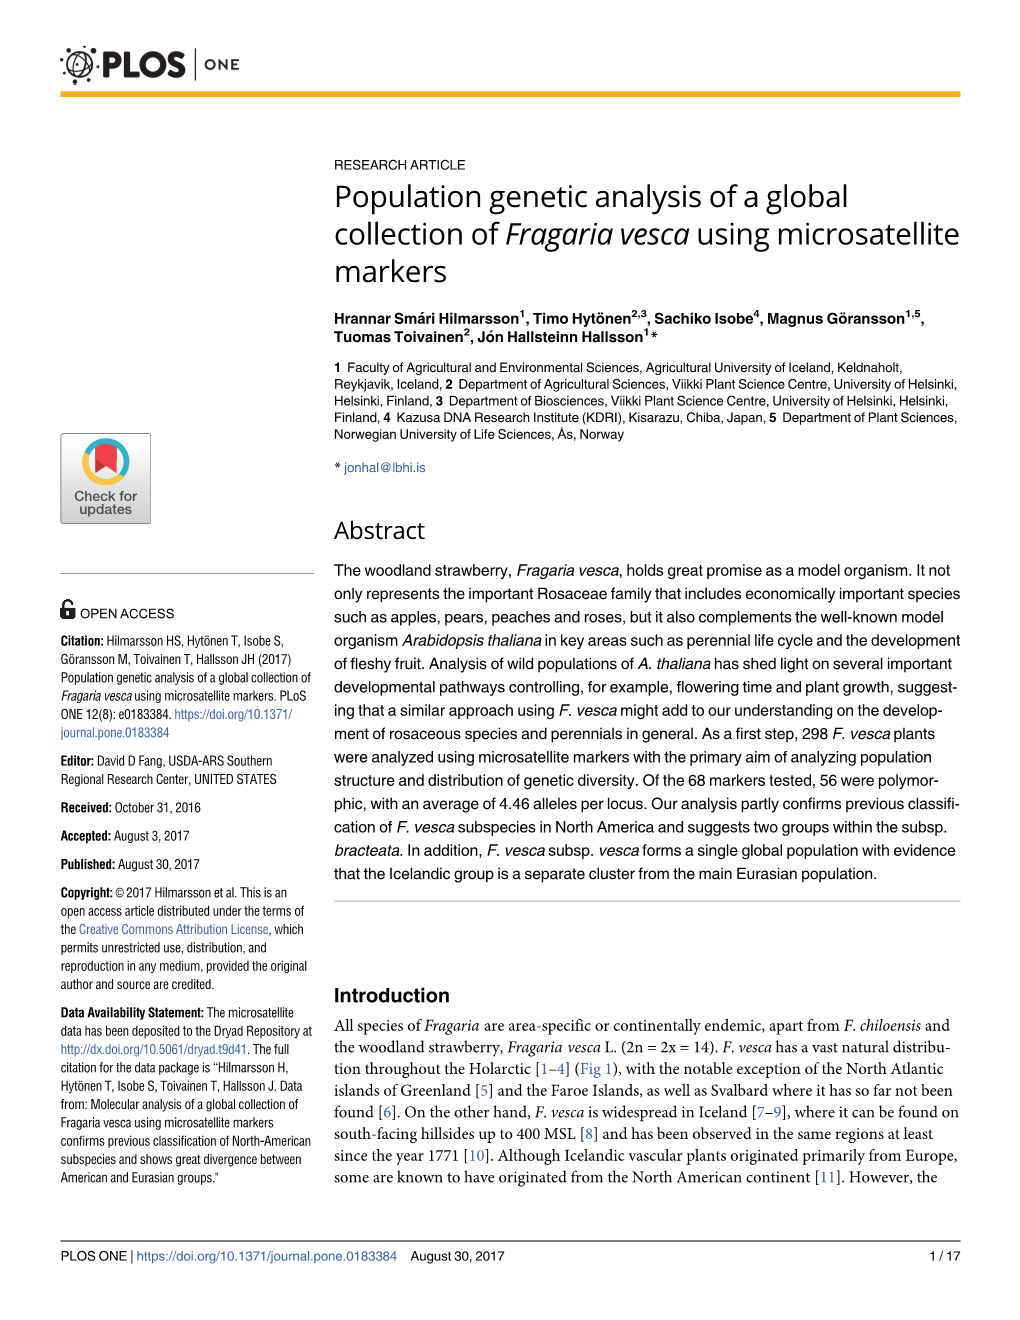 Population Genetic Analysis of a Global Collection of Fragaria Vesca Using Microsatellite Markers